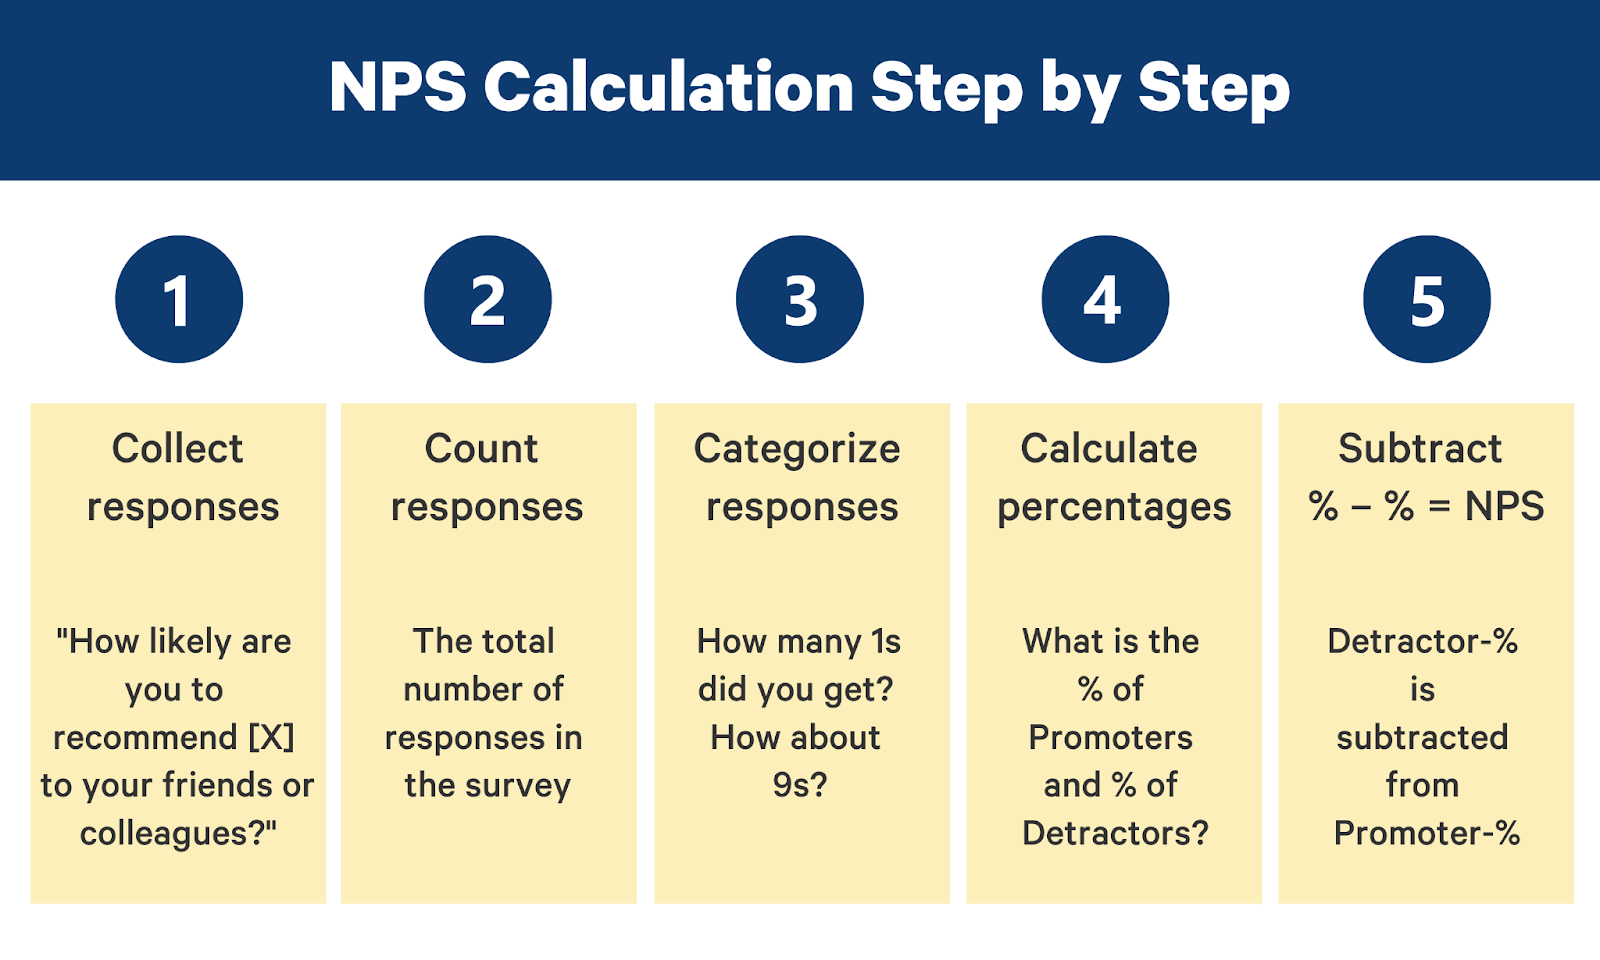 NPS calculation step by step